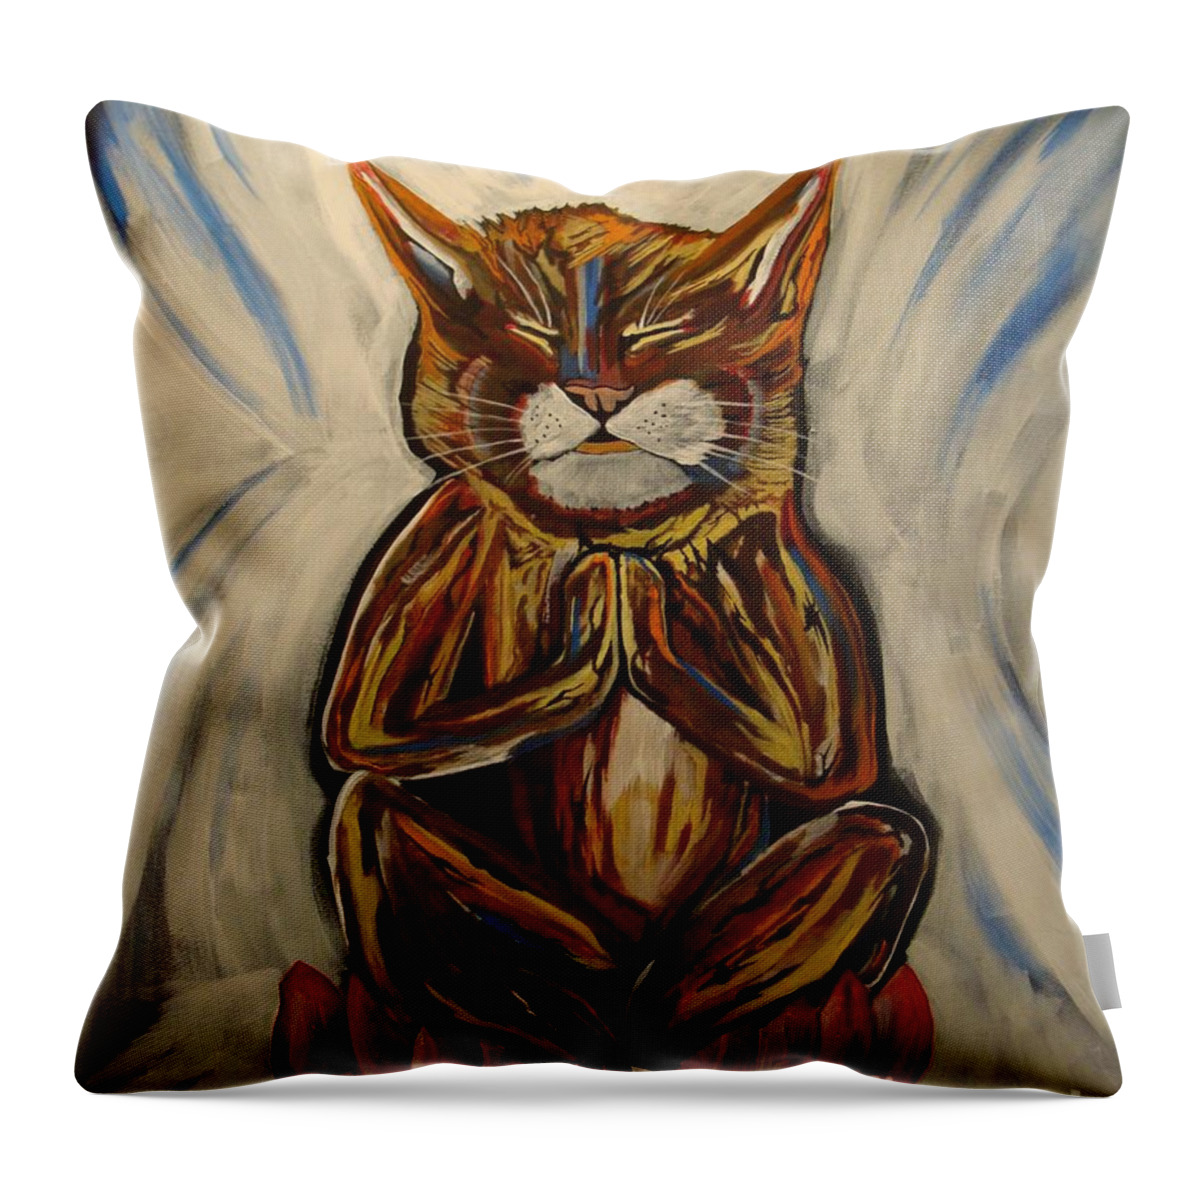 Yoga Throw Pillow featuring the painting Namaste by Stuart Engel